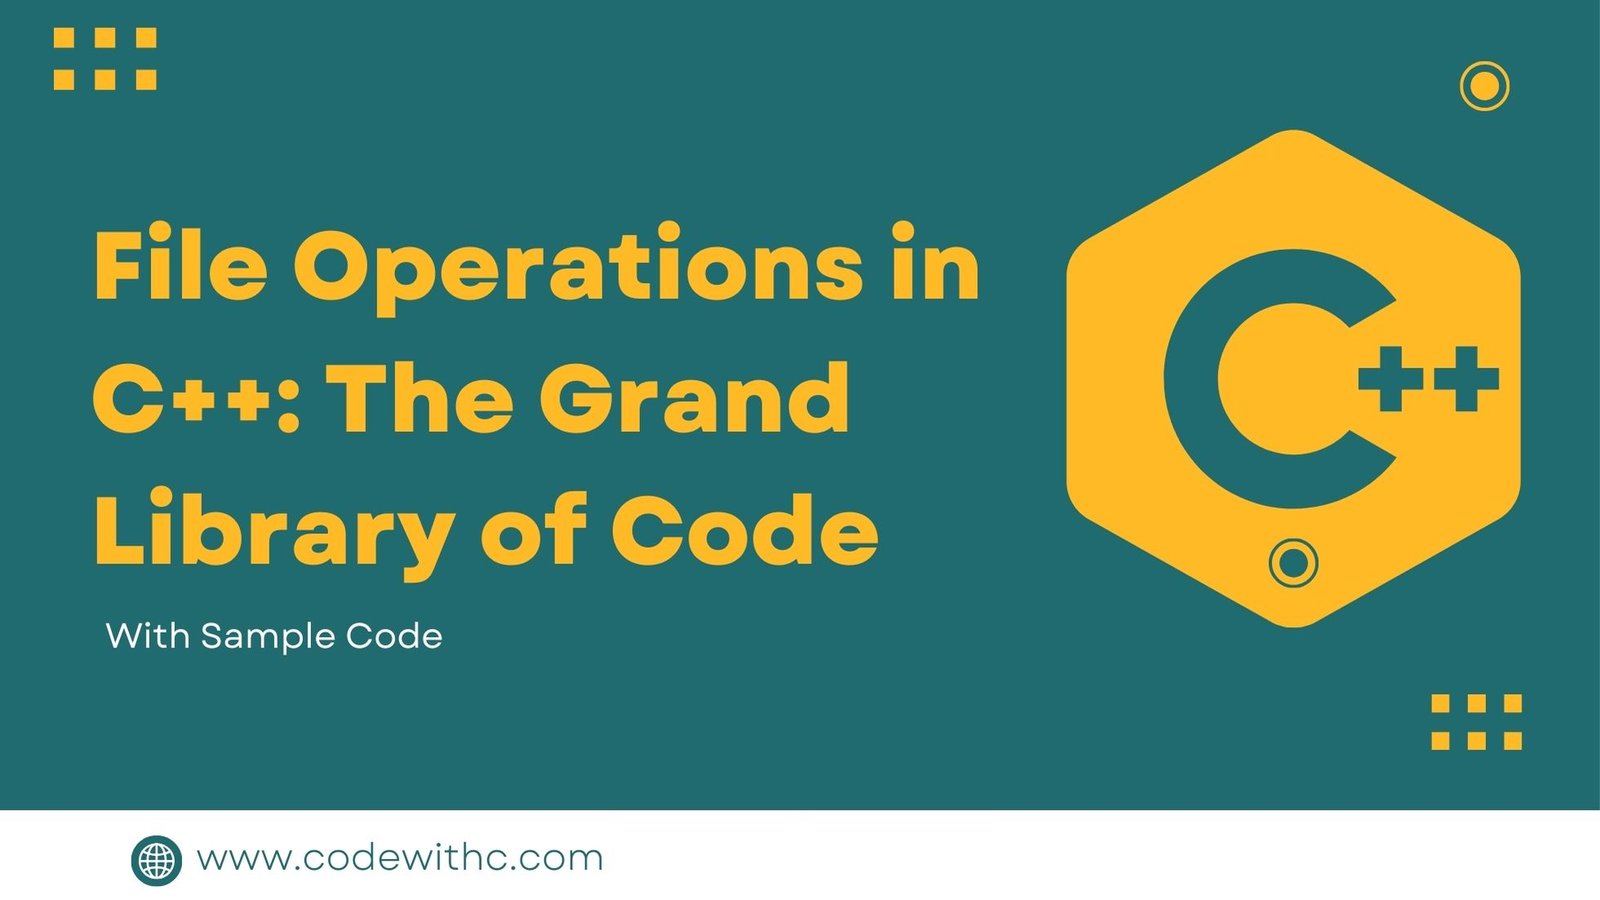 File Operations in C++: The Grand Library of Code